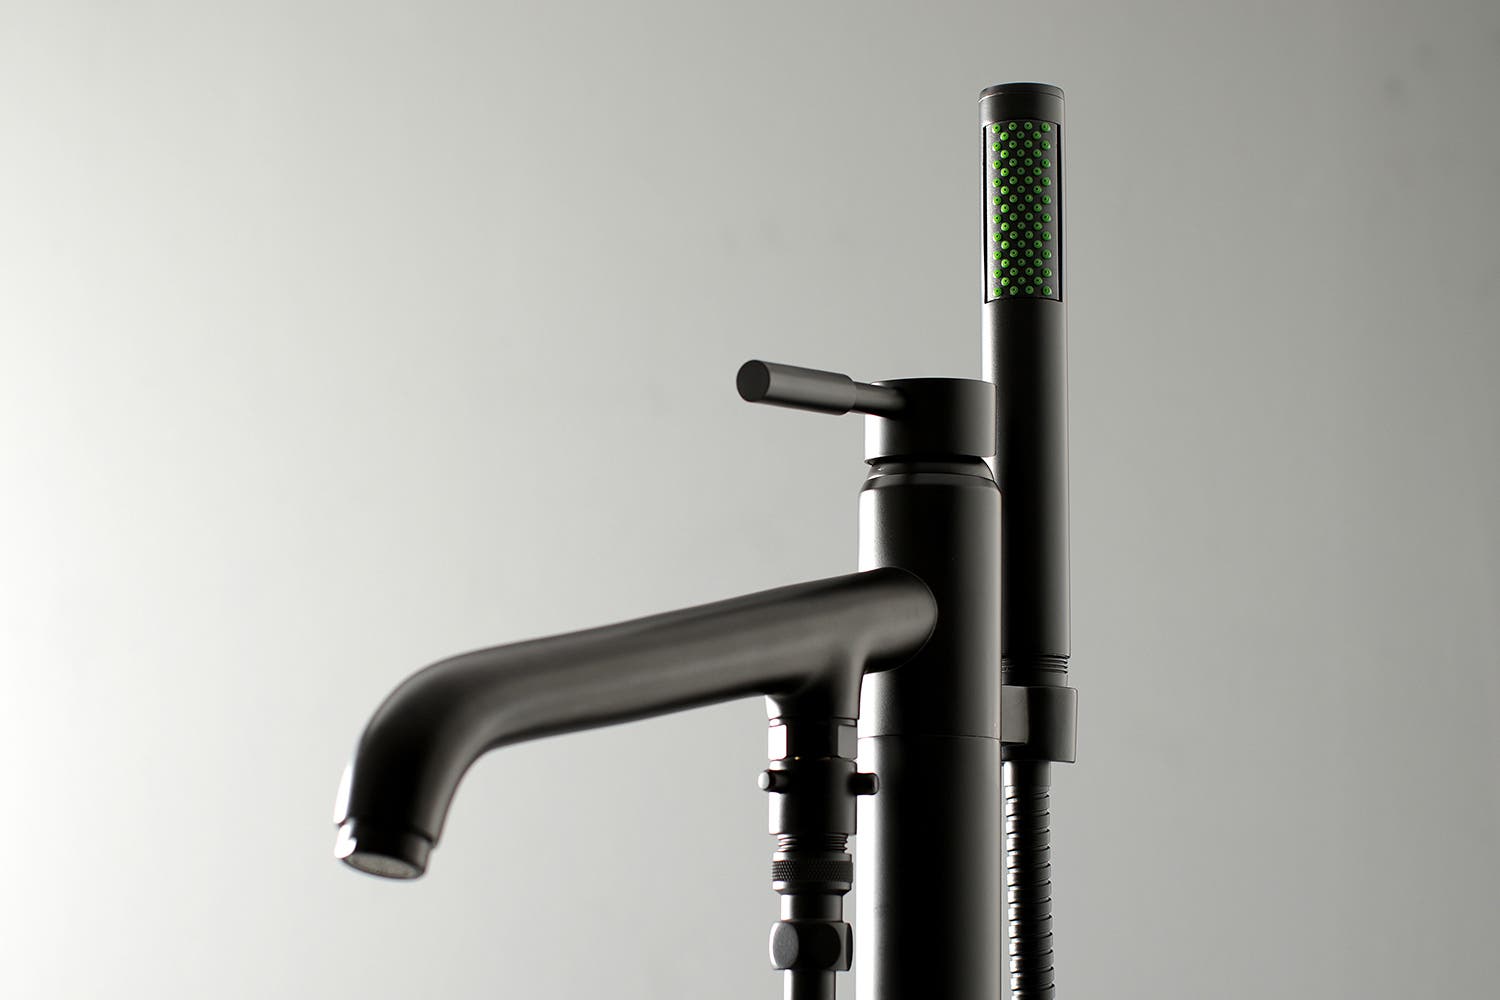 The Concord Tub Filler Towers Expectations, KS8130DL